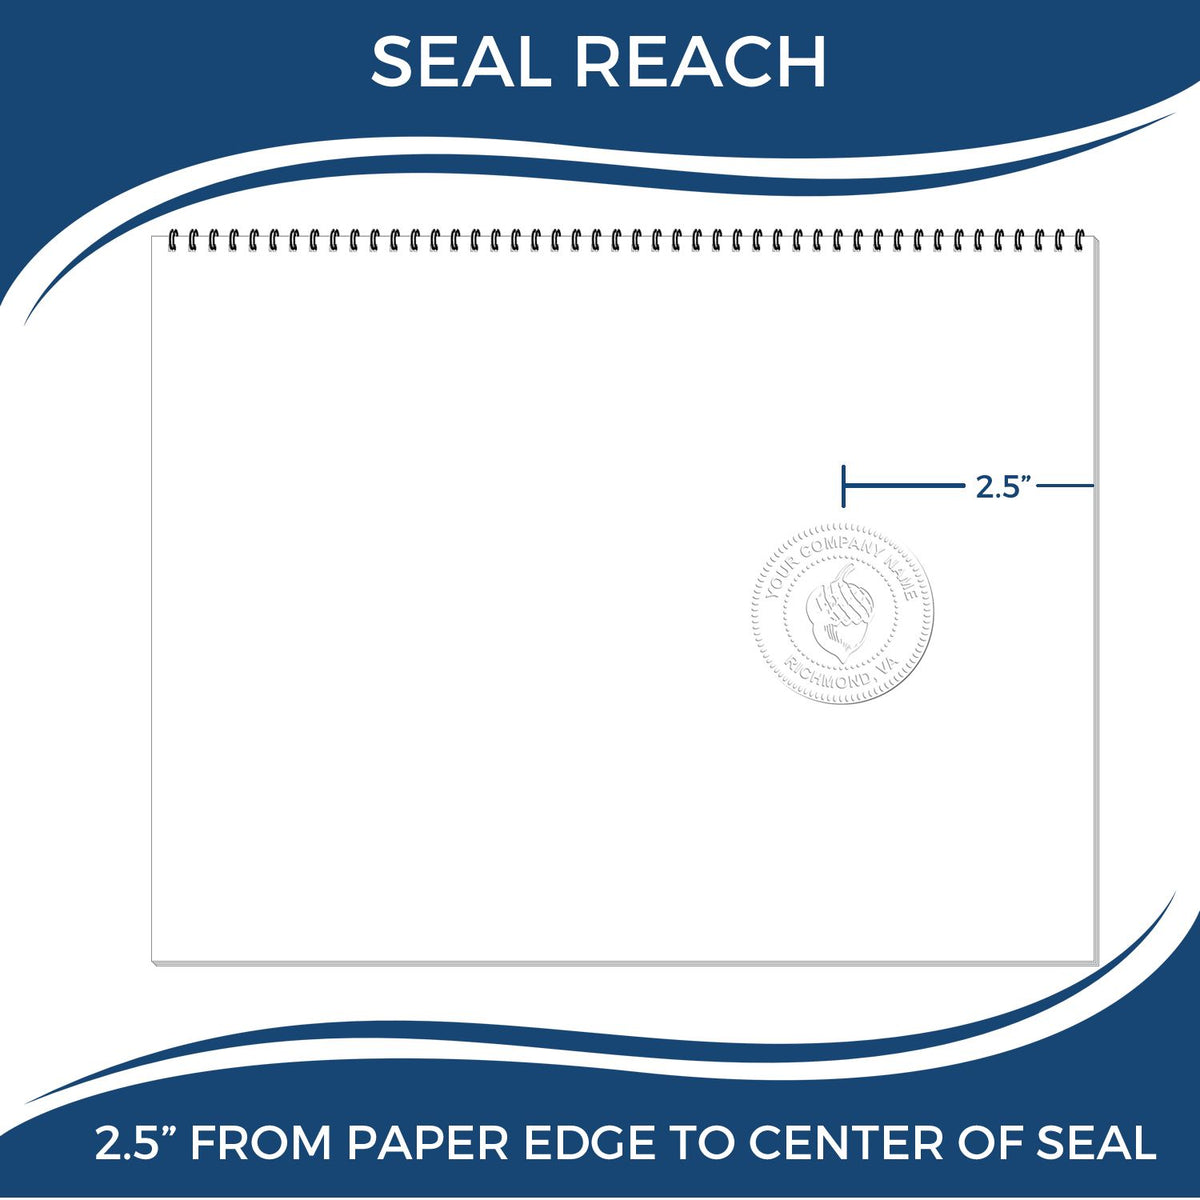 An infographic showing the seal reach which is represented by a ruler and a miniature seal image of the Heavy Duty Cast Iron Georgia Land Surveyor Seal Embosser